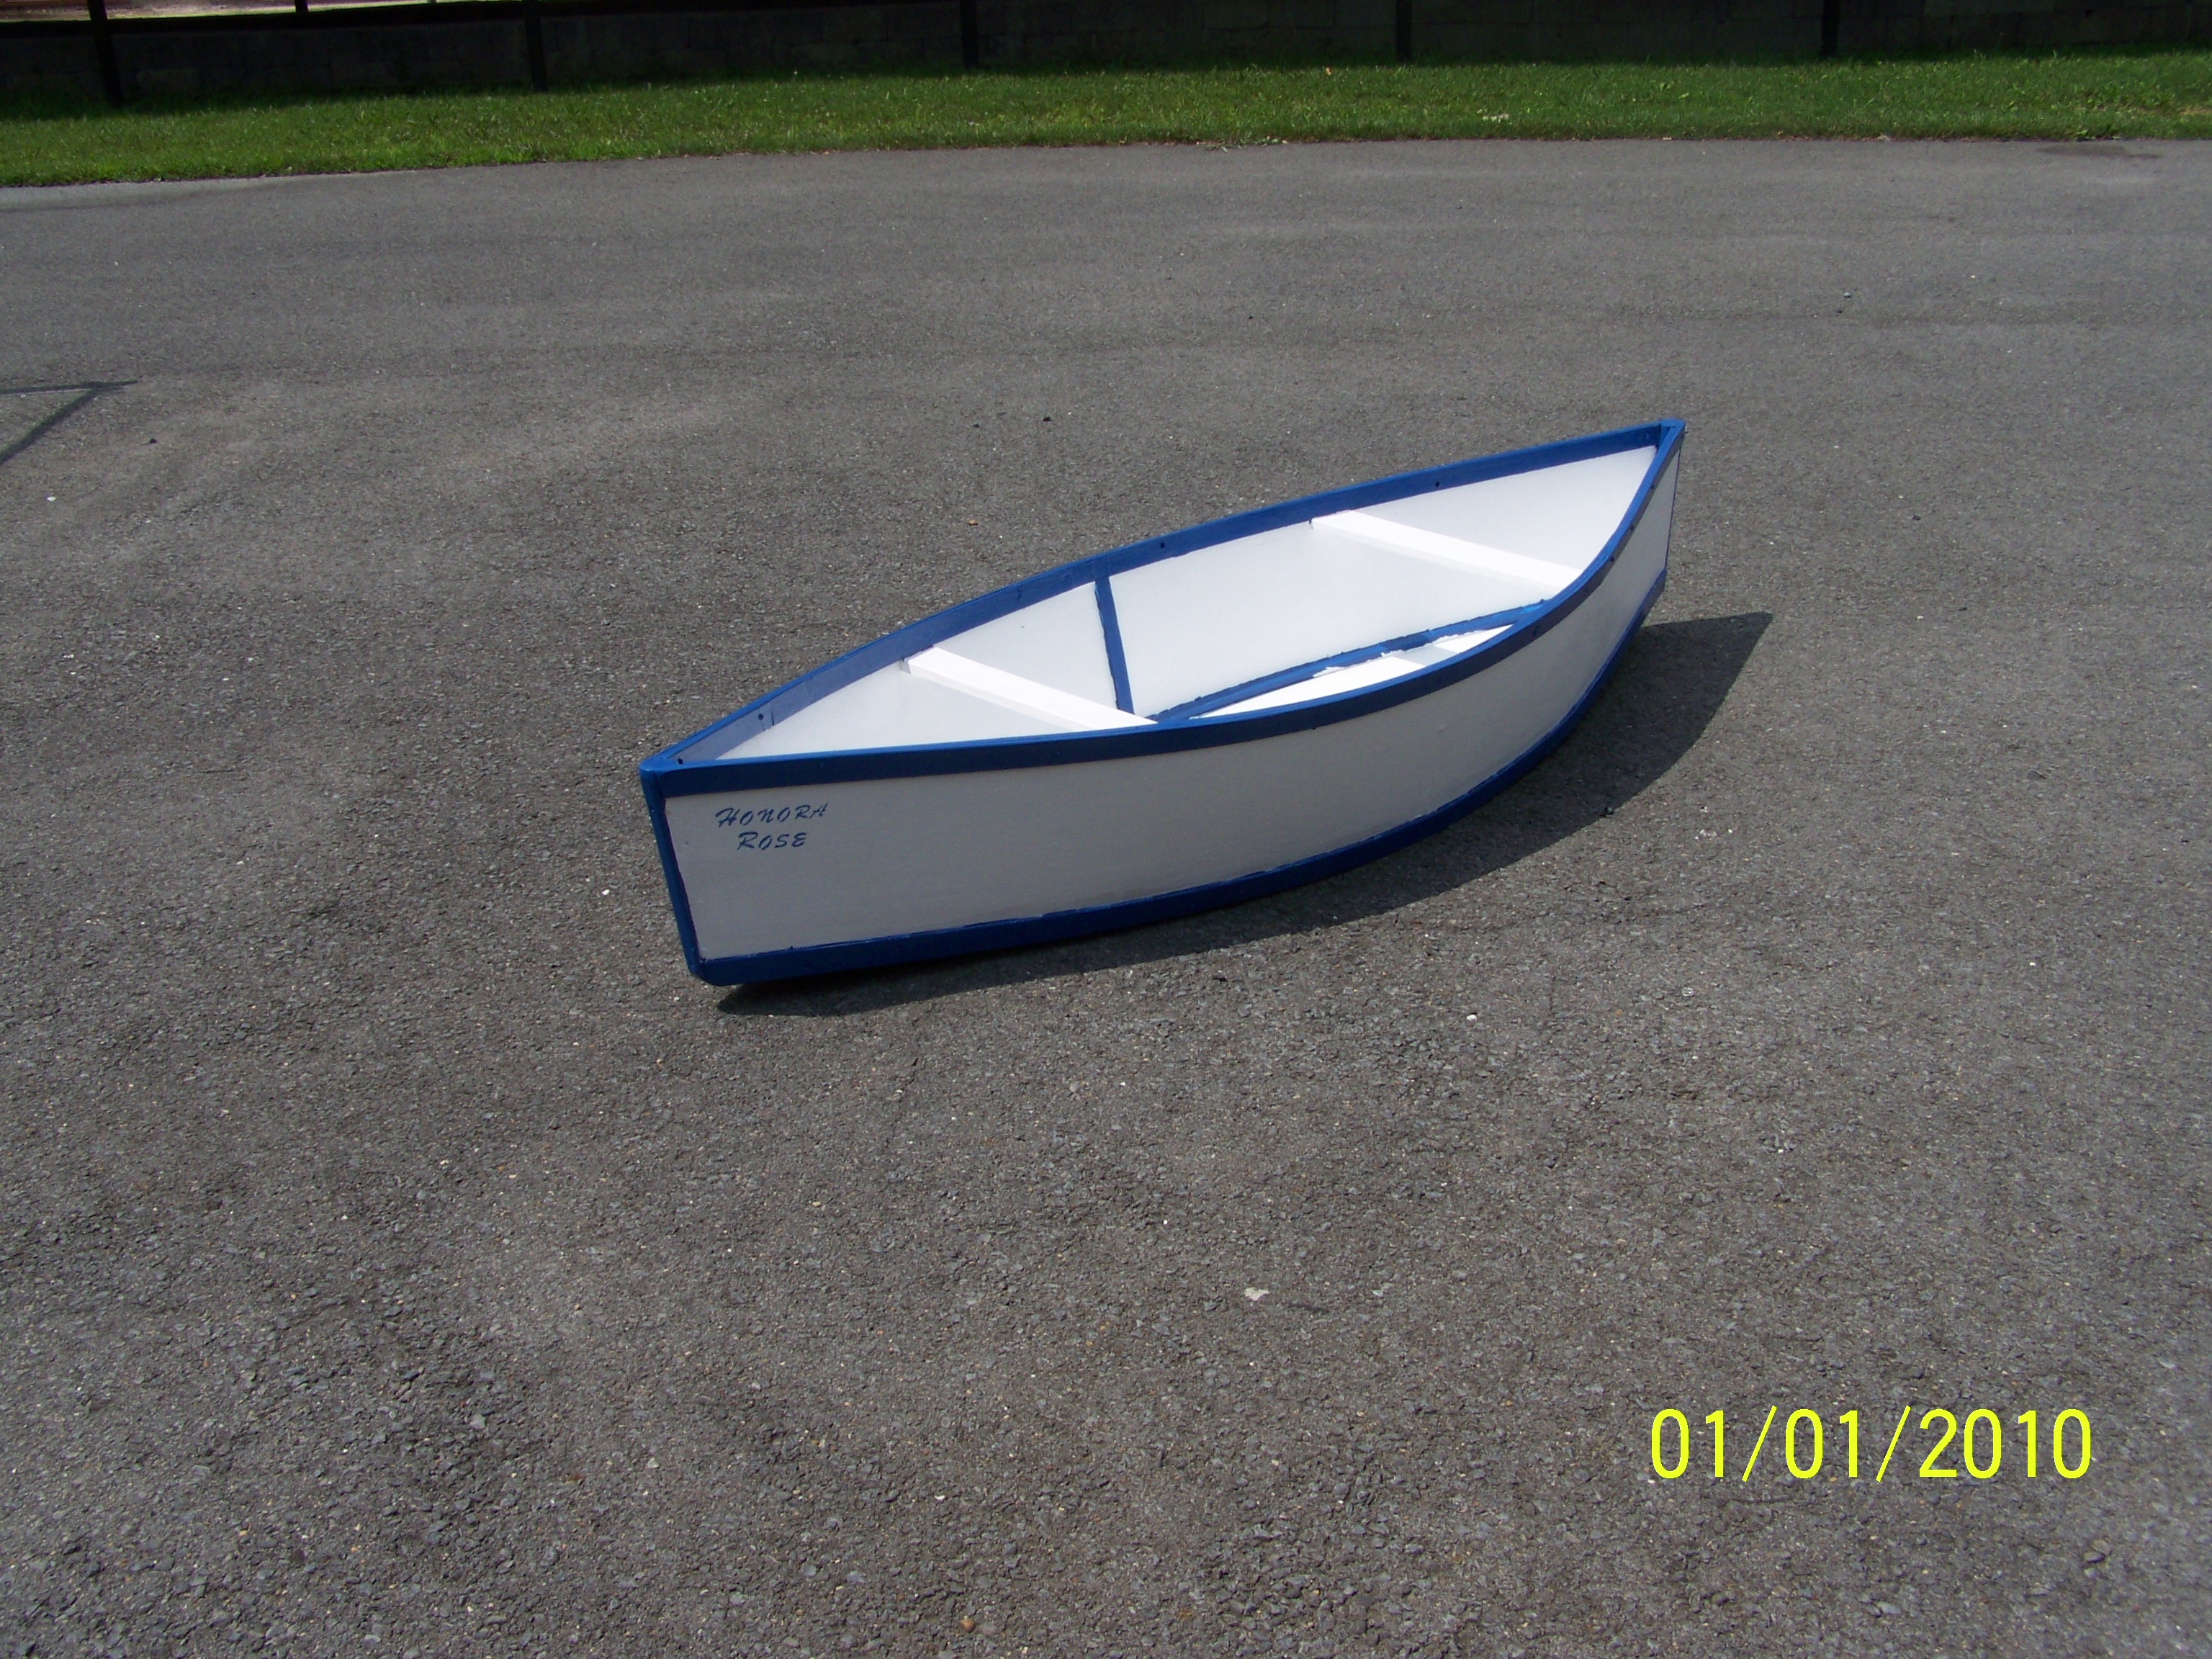 Building a One sheet boat